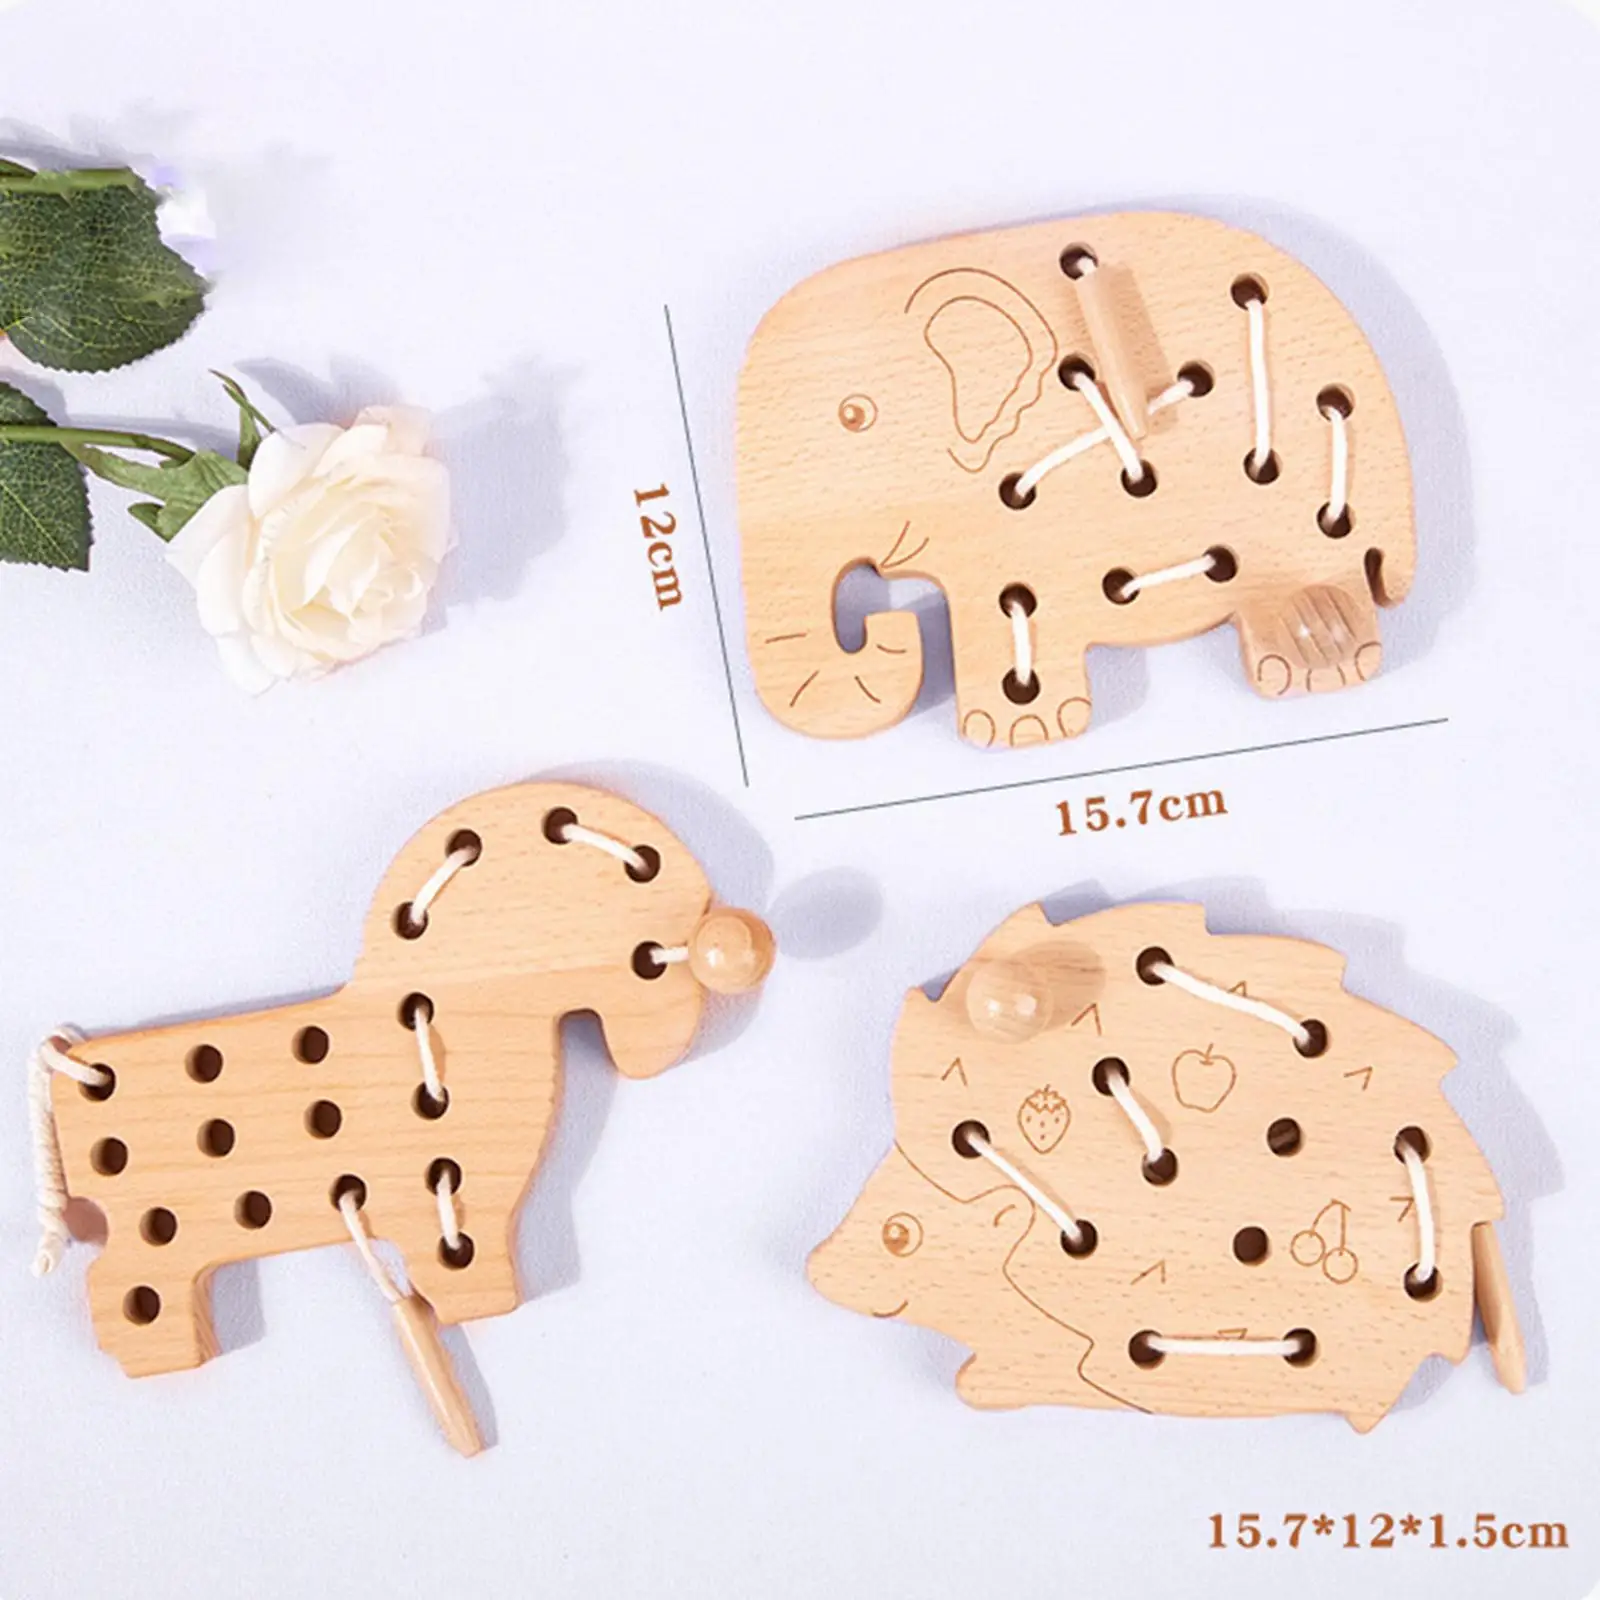 3x Wood Lace Block Puzzle Early Learning Travel Montessori Toys Wooden Lacing Threading for Boys Kids Birthday Gift